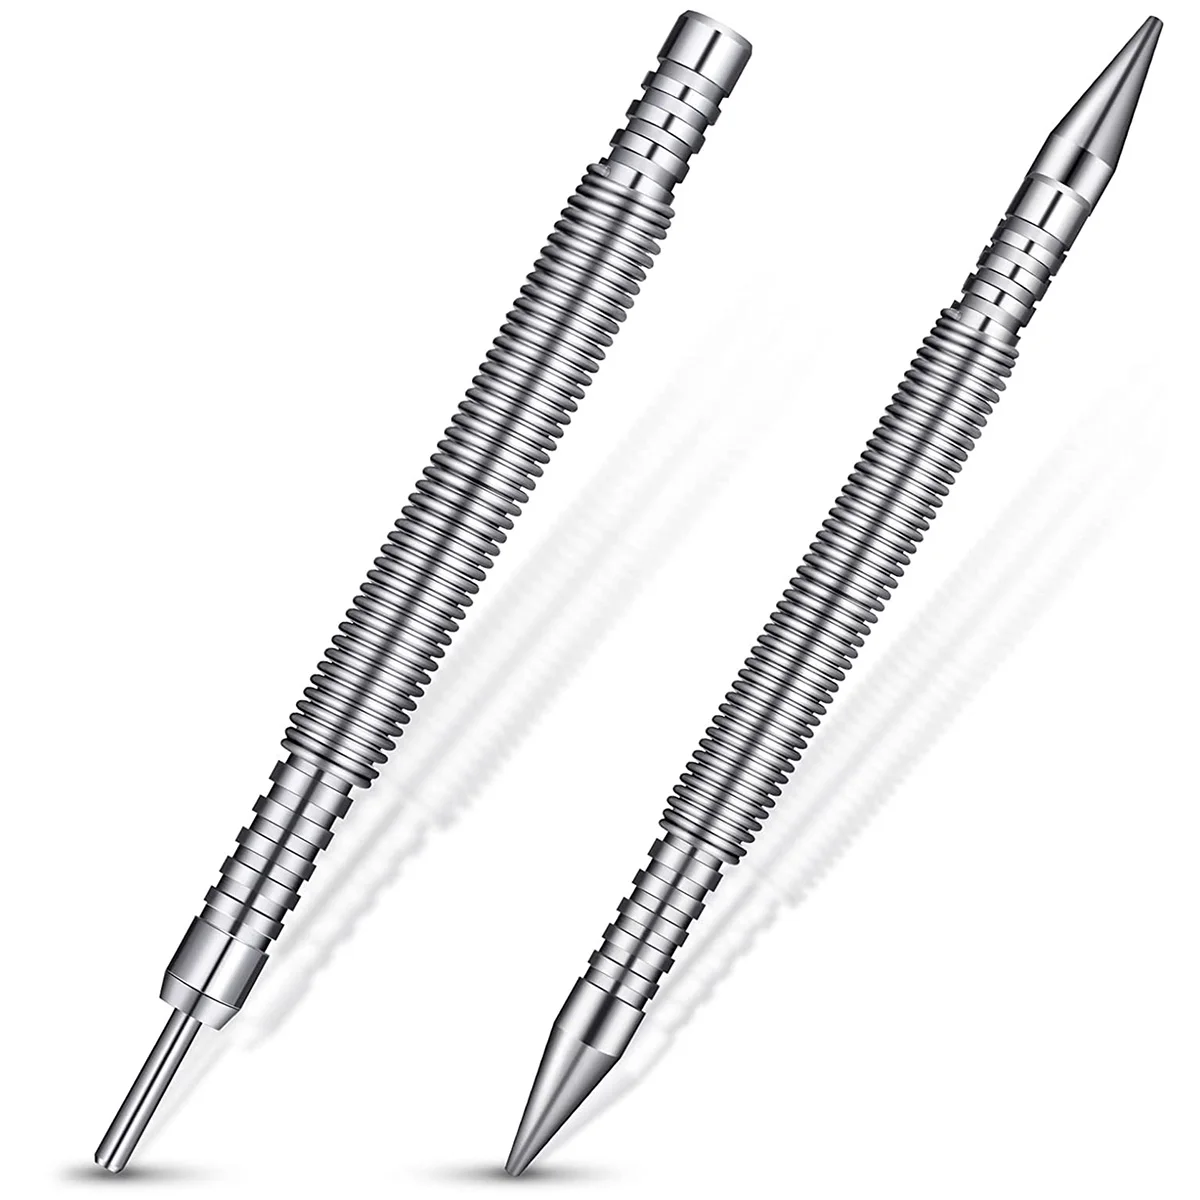 

2Pcs Spring Center Punch Hammerless Dual Head Nail Setter Spring Loaded High Carbon Steel Nail Punch Narrow Space Door Hinge Pin